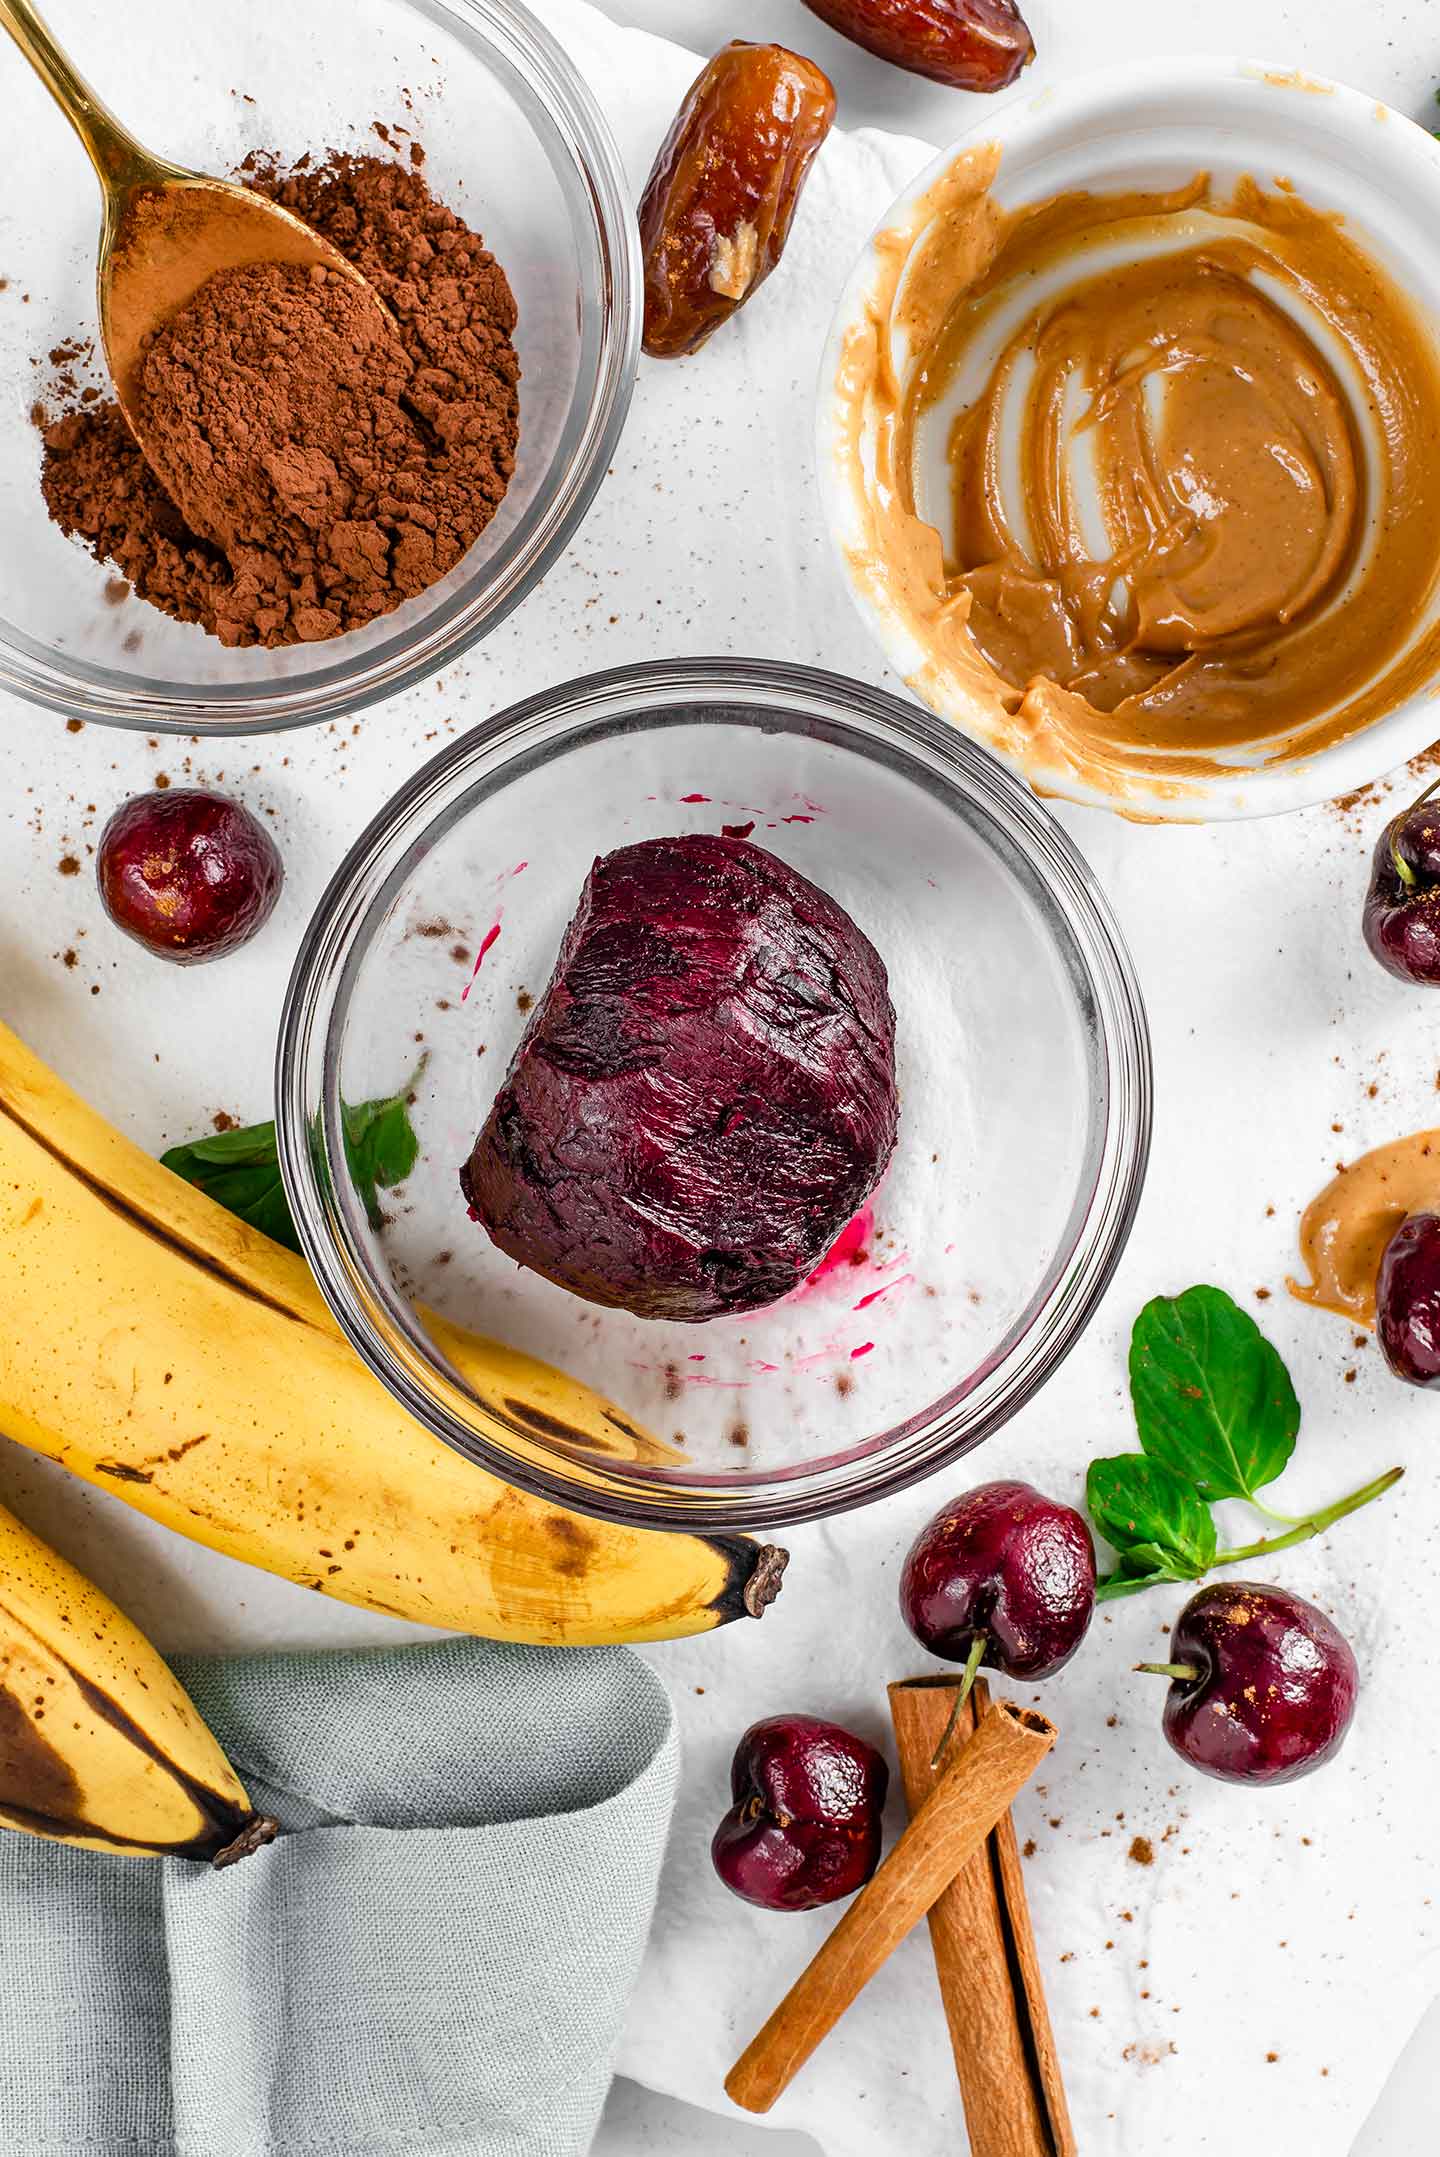 Top down view of a roasted beet in a glass dish with bananas, cocoa powder, peanut butter, cherries, dates, and cinnamon sticks scattered around.